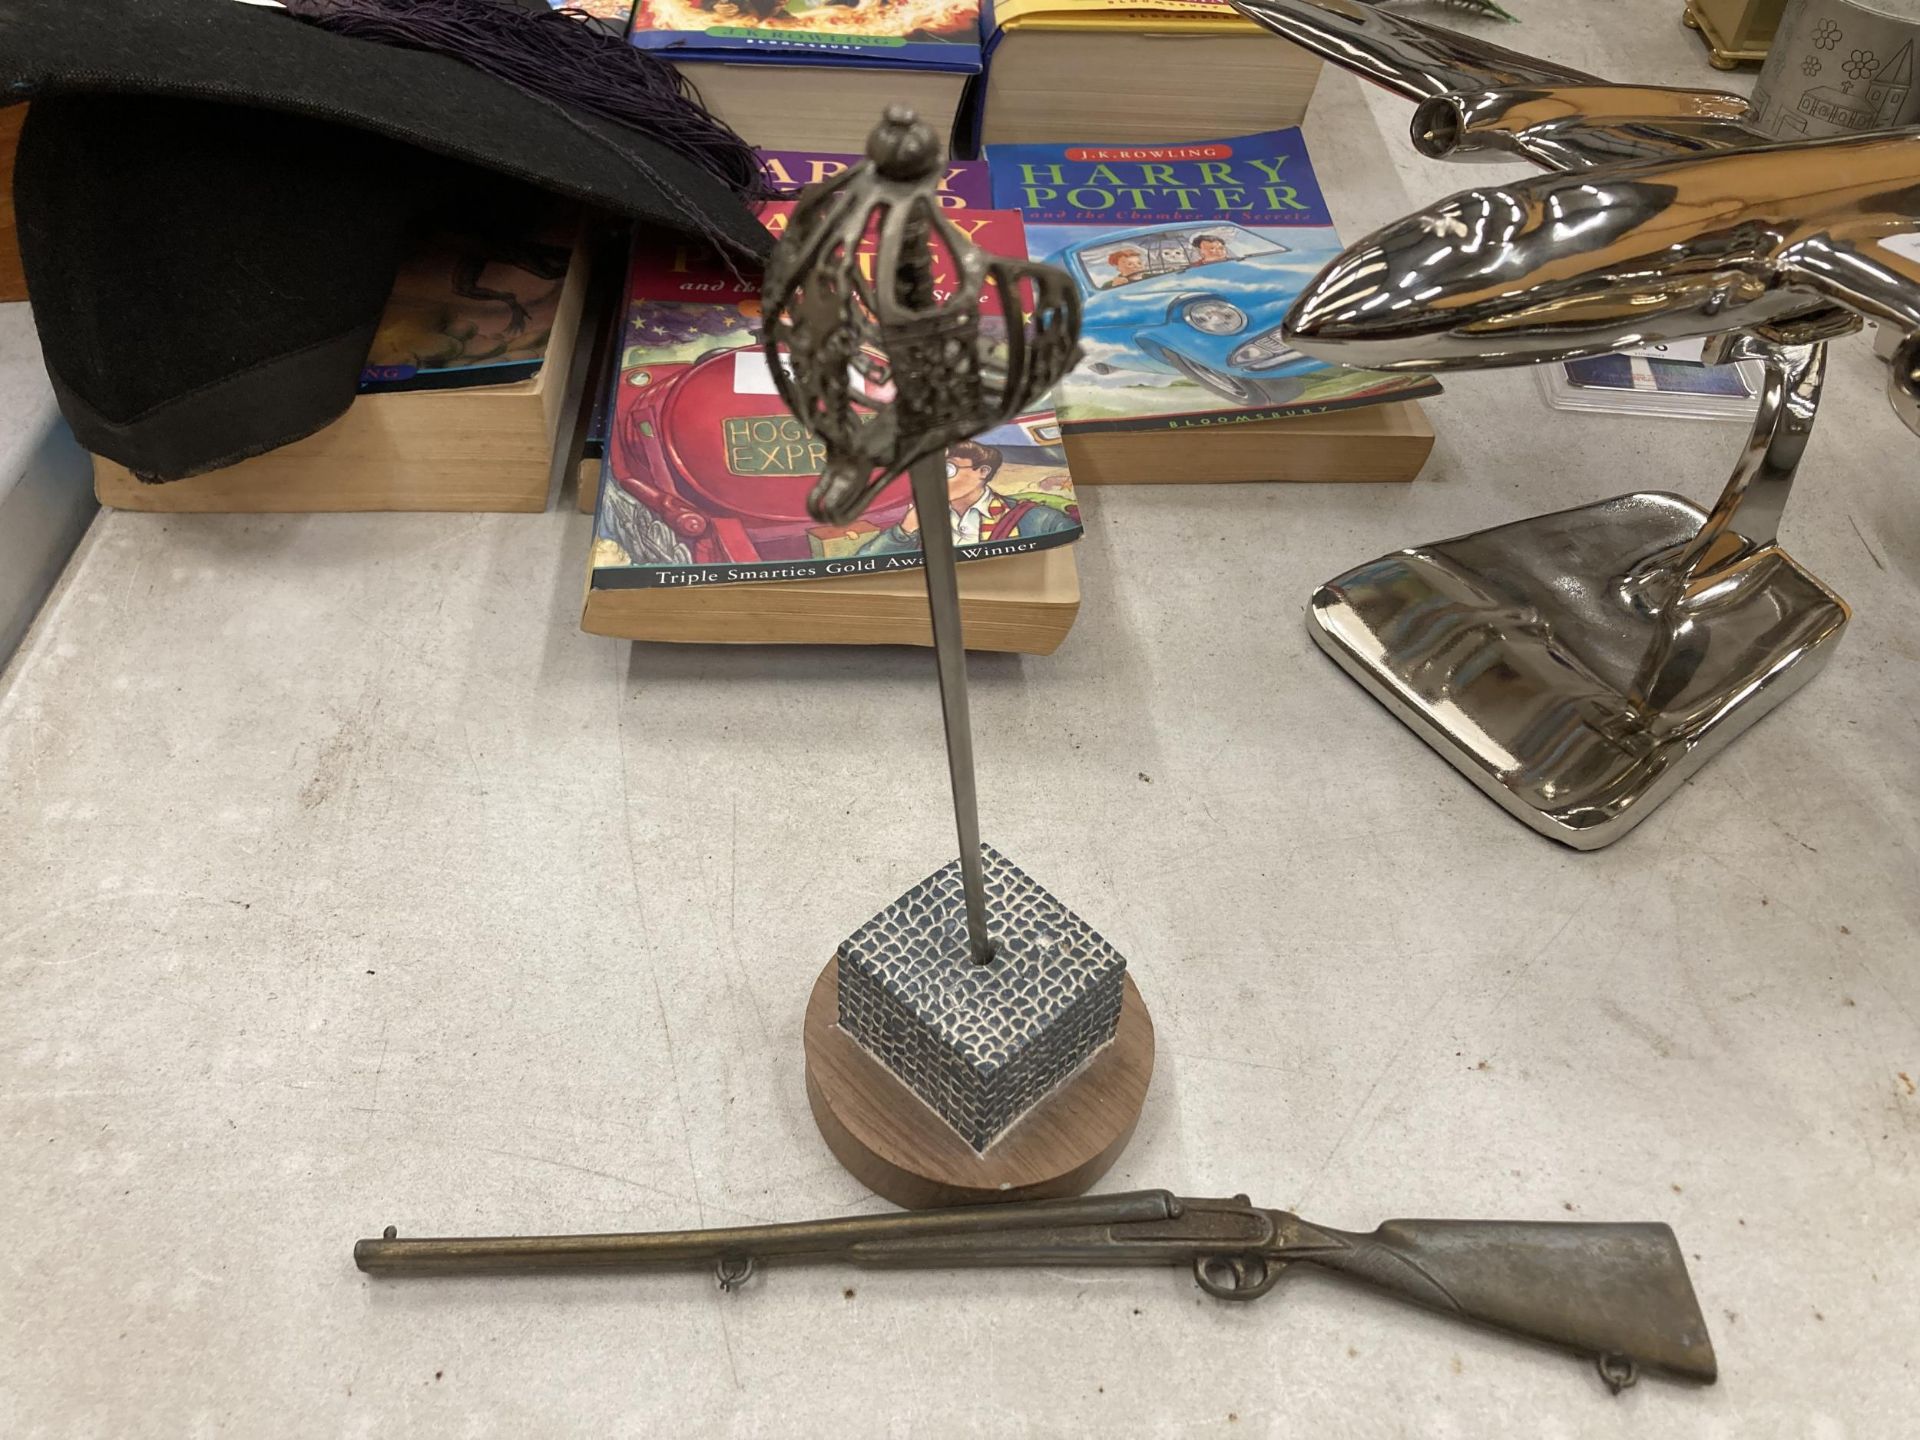 A SWORD PAPERWEIGHT AND A SMALL MODEL OF A RIFLE